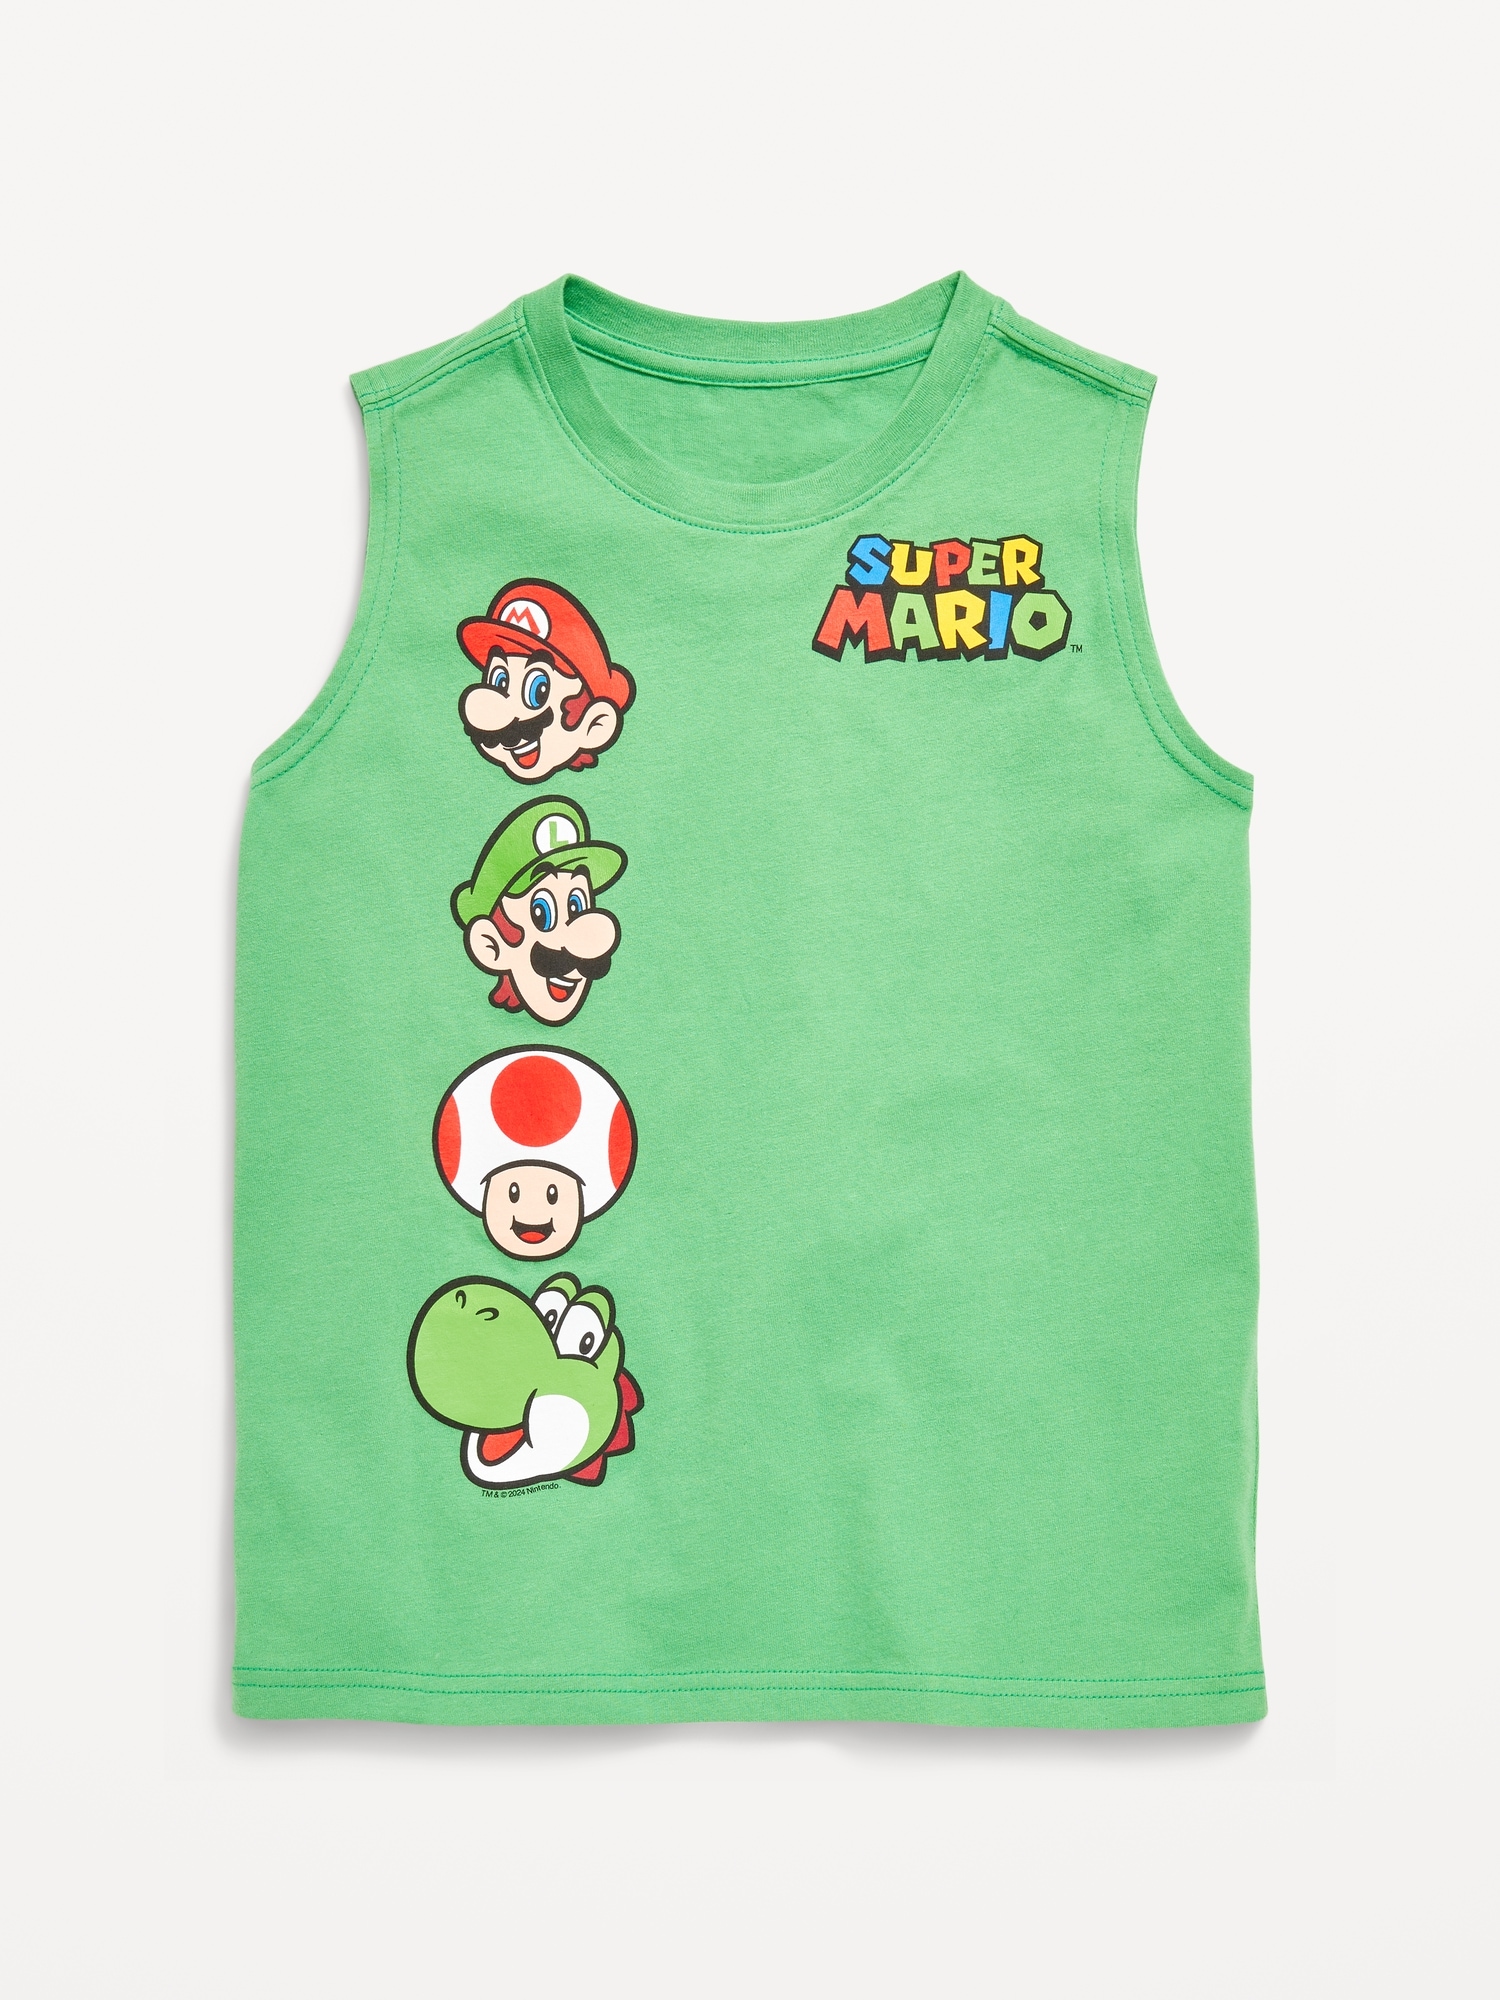 Super Mario Gender-Neutral Graphic Tank Top for Kids Hot Deal